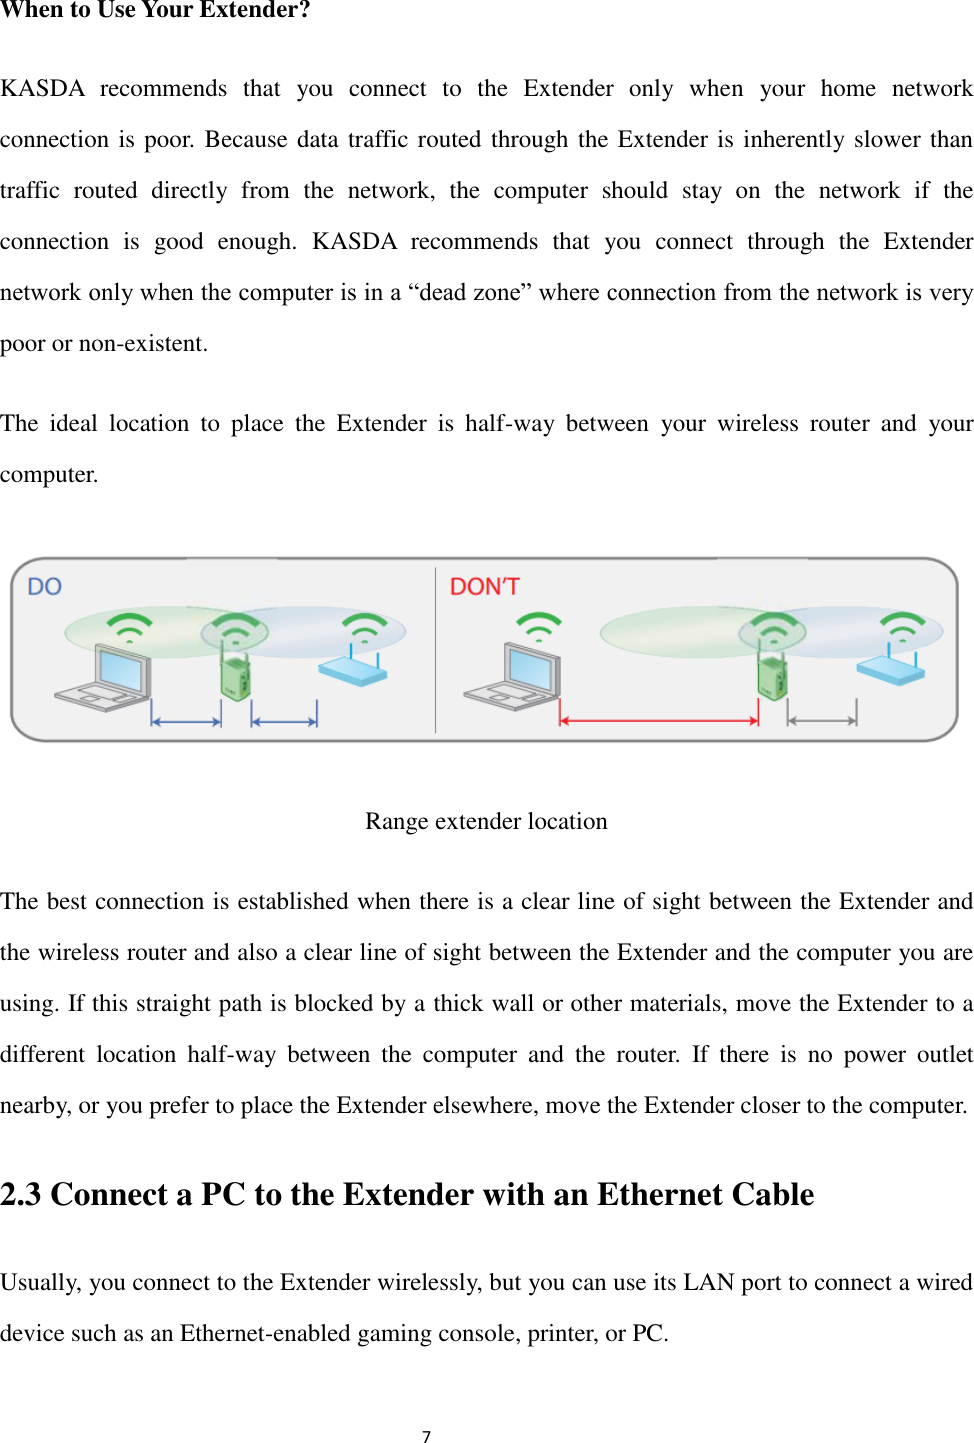                                                               7                                                                                                         When to Use Your Extender? KASDA  recommends  that  you  connect  to  the  Extender  only  when  your  home  network connection is poor. Because data traffic routed through the Extender is inherently slower than traffic  routed  directly  from  the  network,  the  computer  should  stay  on  the  network  if  the connection  is  good  enough.  KASDA  recommends  that  you  connect  through  the  Extender network only when the computer is in a “dead zone” where connection from the network is very poor or non-existent. The  ideal  location  to  place  the  Extender  is  half-way  between  your  wireless  router  and  your computer.  Range extender location The best connection is established when there is a clear line of sight between the Extender and the wireless router and also a clear line of sight between the Extender and the computer you are using. If this straight path is blocked by a thick wall or other materials, move the Extender to a different  location  half-way  between  the  computer  and  the  router.  If  there  is  no  power  outlet nearby, or you prefer to place the Extender elsewhere, move the Extender closer to the computer.   2.3 Connect a PC to the Extender with an Ethernet Cable Usually, you connect to the Extender wirelessly, but you can use its LAN port to connect a wired device such as an Ethernet-enabled gaming console, printer, or PC. 